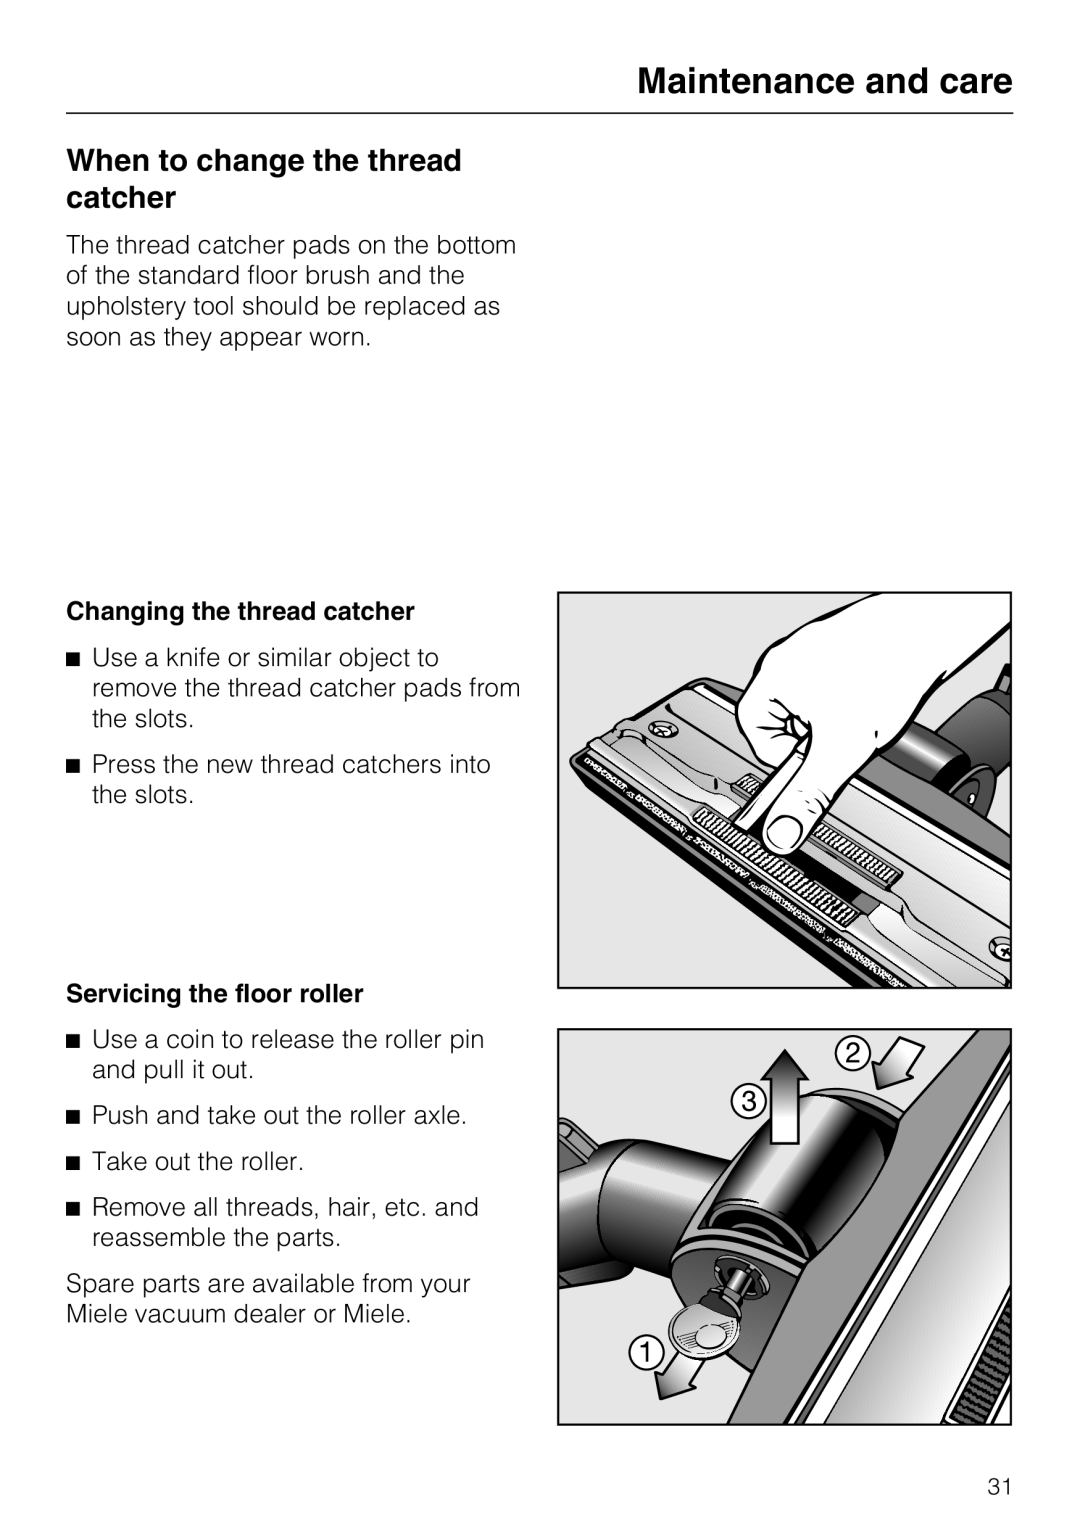 Miele S 5001 manual When to change the thread catcher, Maintenance and care, Changing the thread catcher 